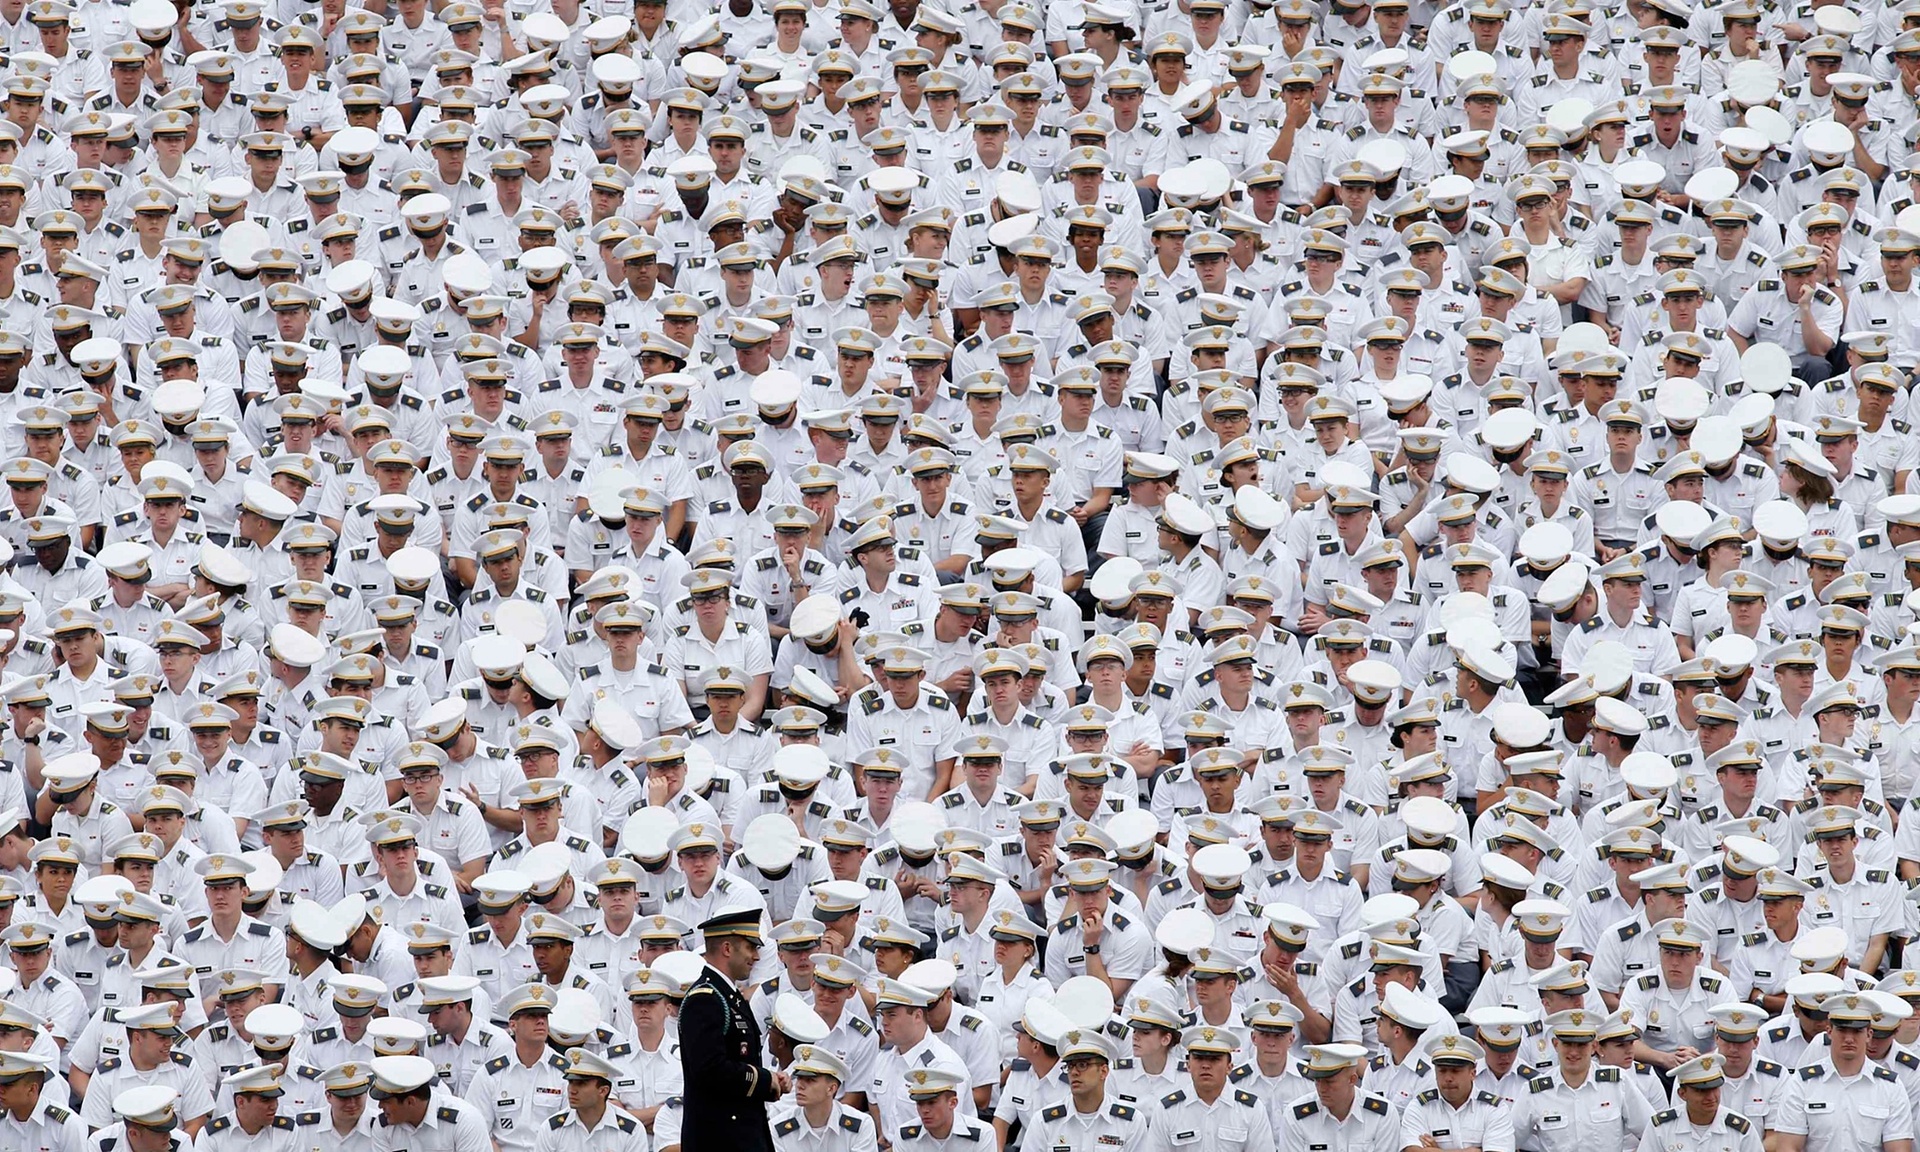 Underclassmen attend a commencement ceremony at the United States Military Academy at West Point, New York.
Photograph: Kevin Lamarque/Reuters